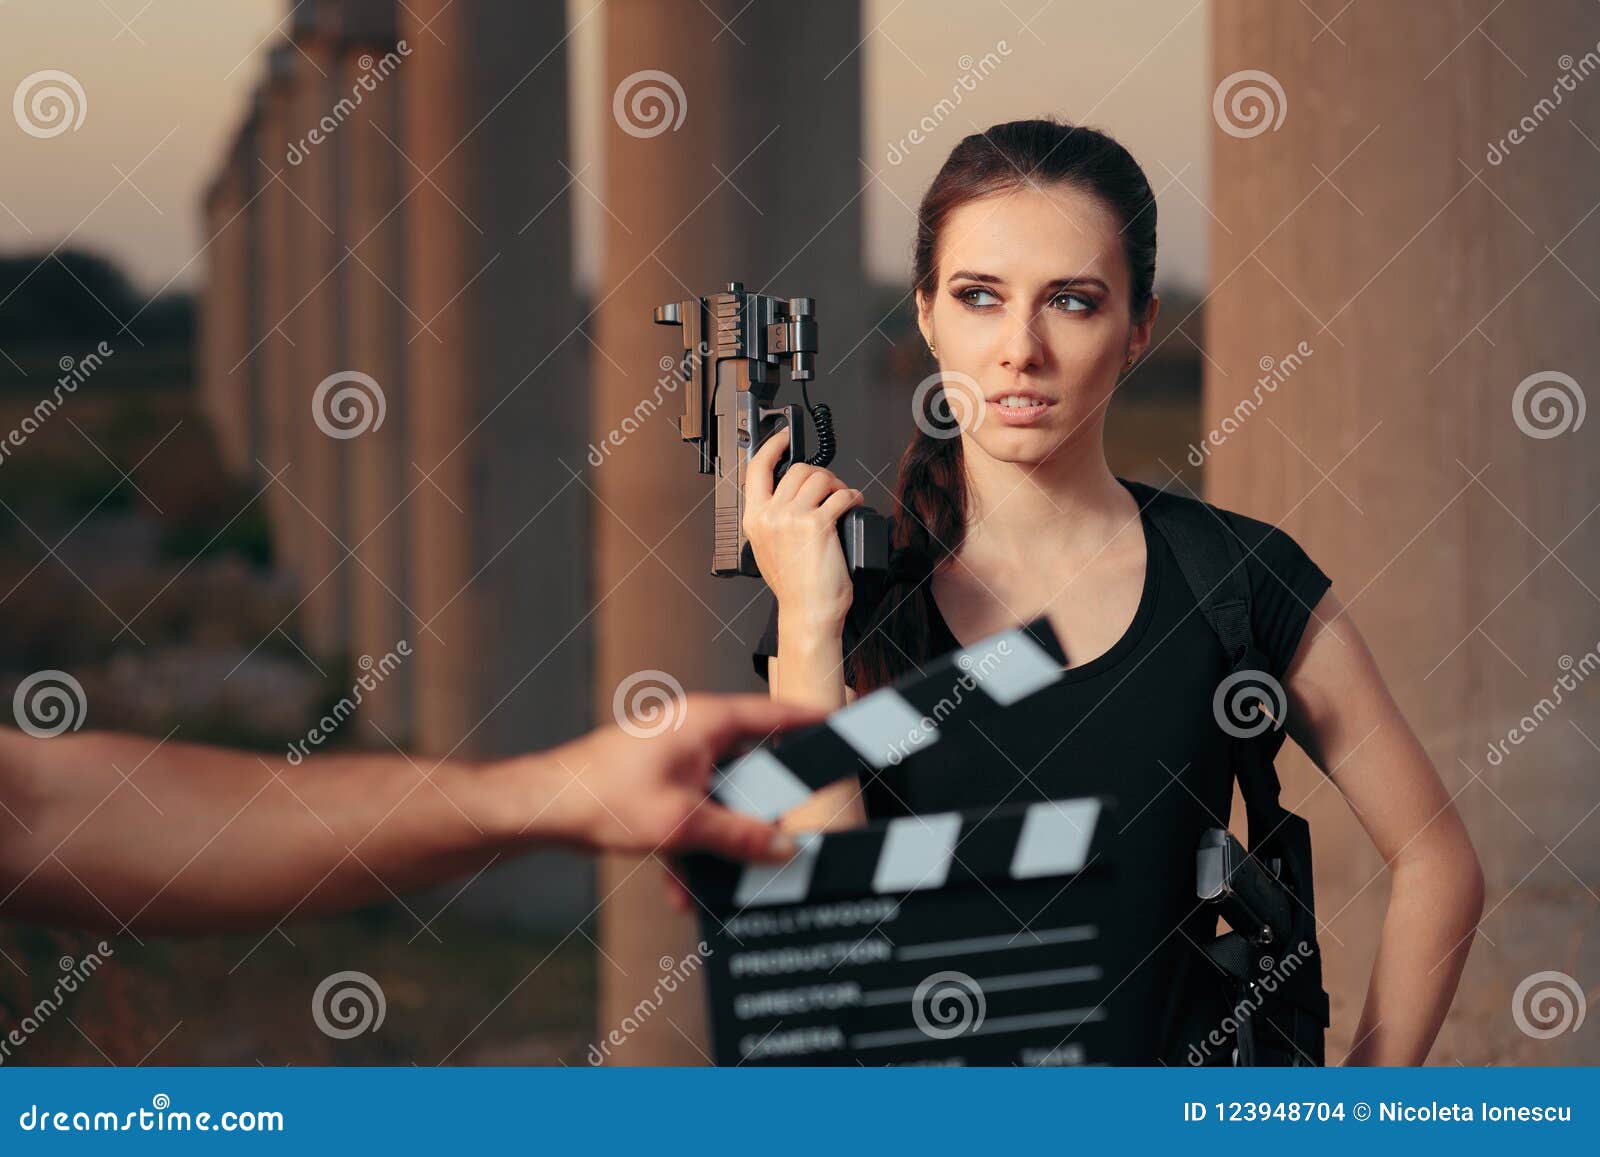 Action Female Superhero Actress Movie Star Shooting Scene Stock Photo Image Of Character Force 123948704